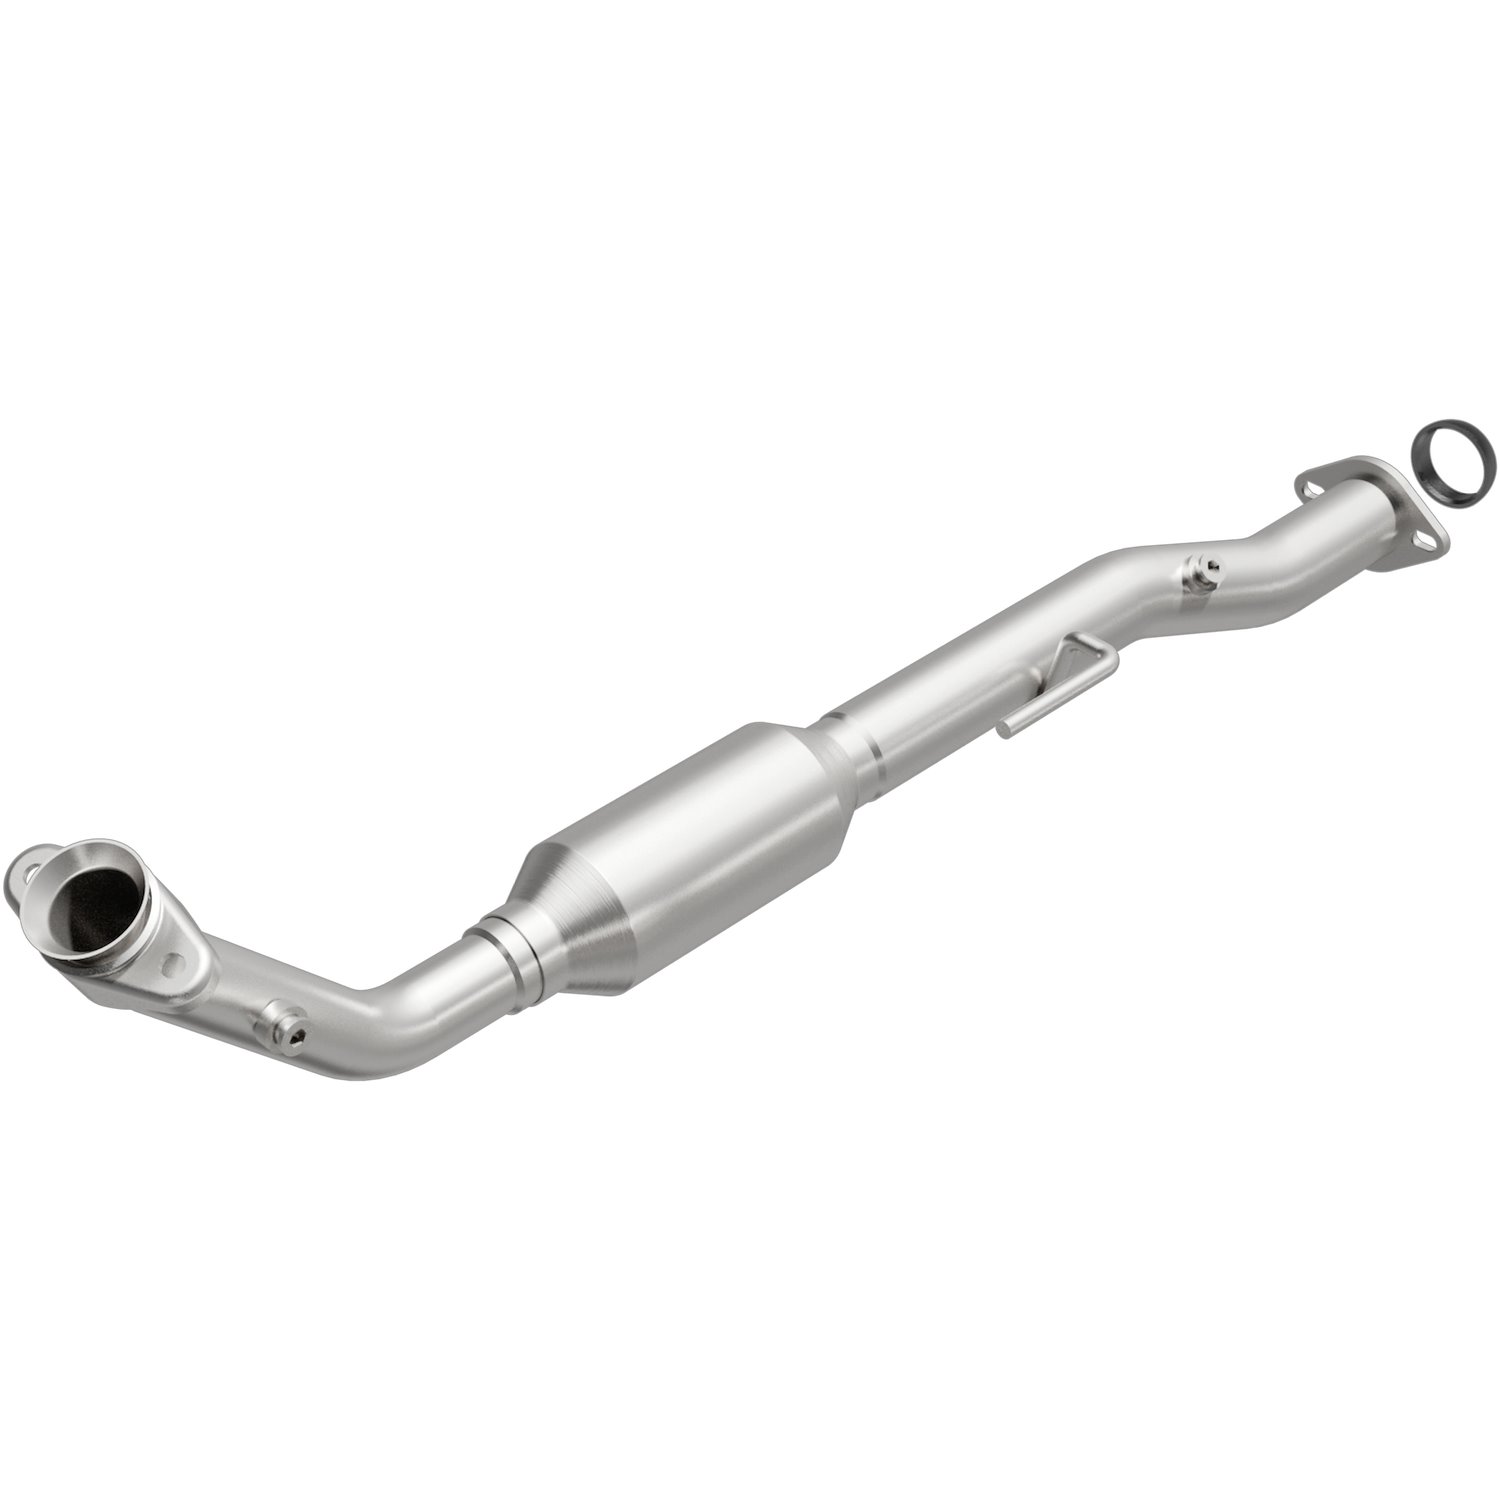 1996-1997 Ford Ranger California Grade CARB Compliant Direct-Fit Catalytic Converter